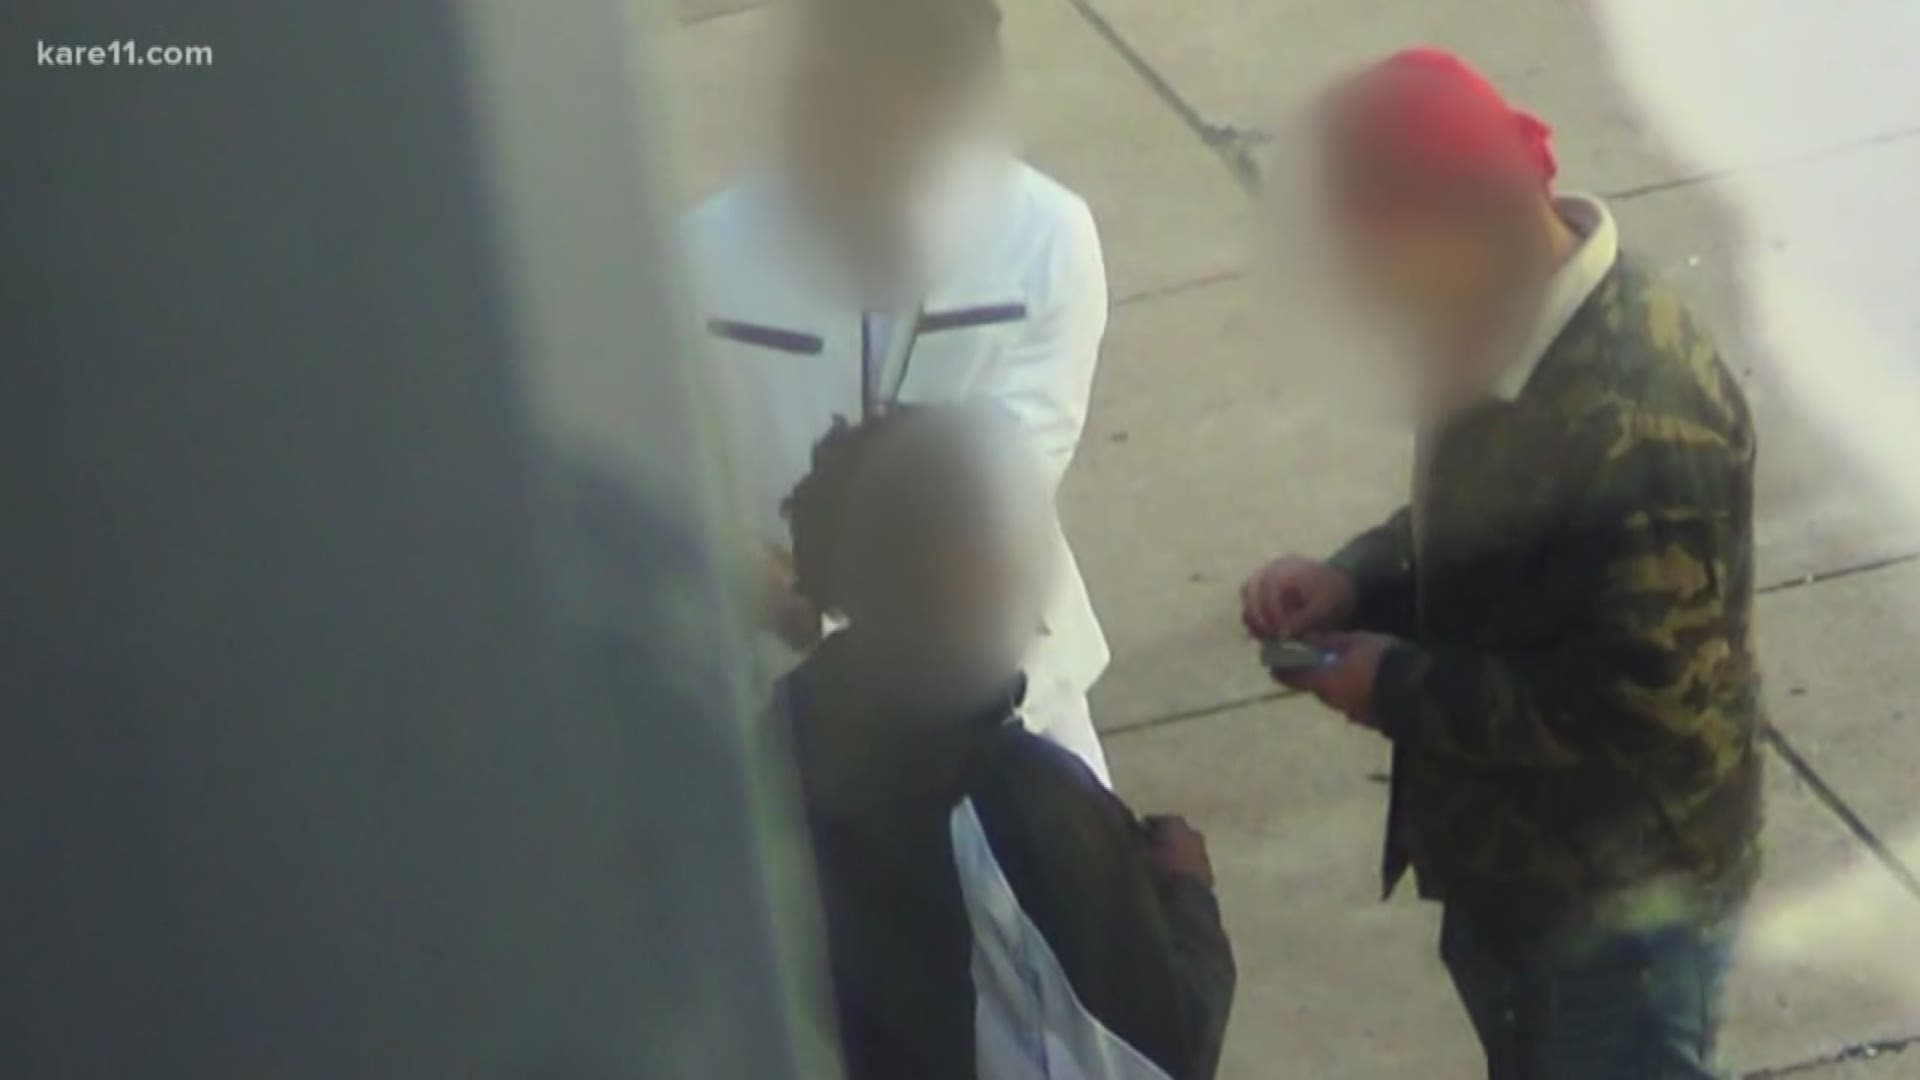 A KARE 11 hidden camera investigation documented what appears to be the unchecked free flow of drugs and cash changing hands in broad daylight.